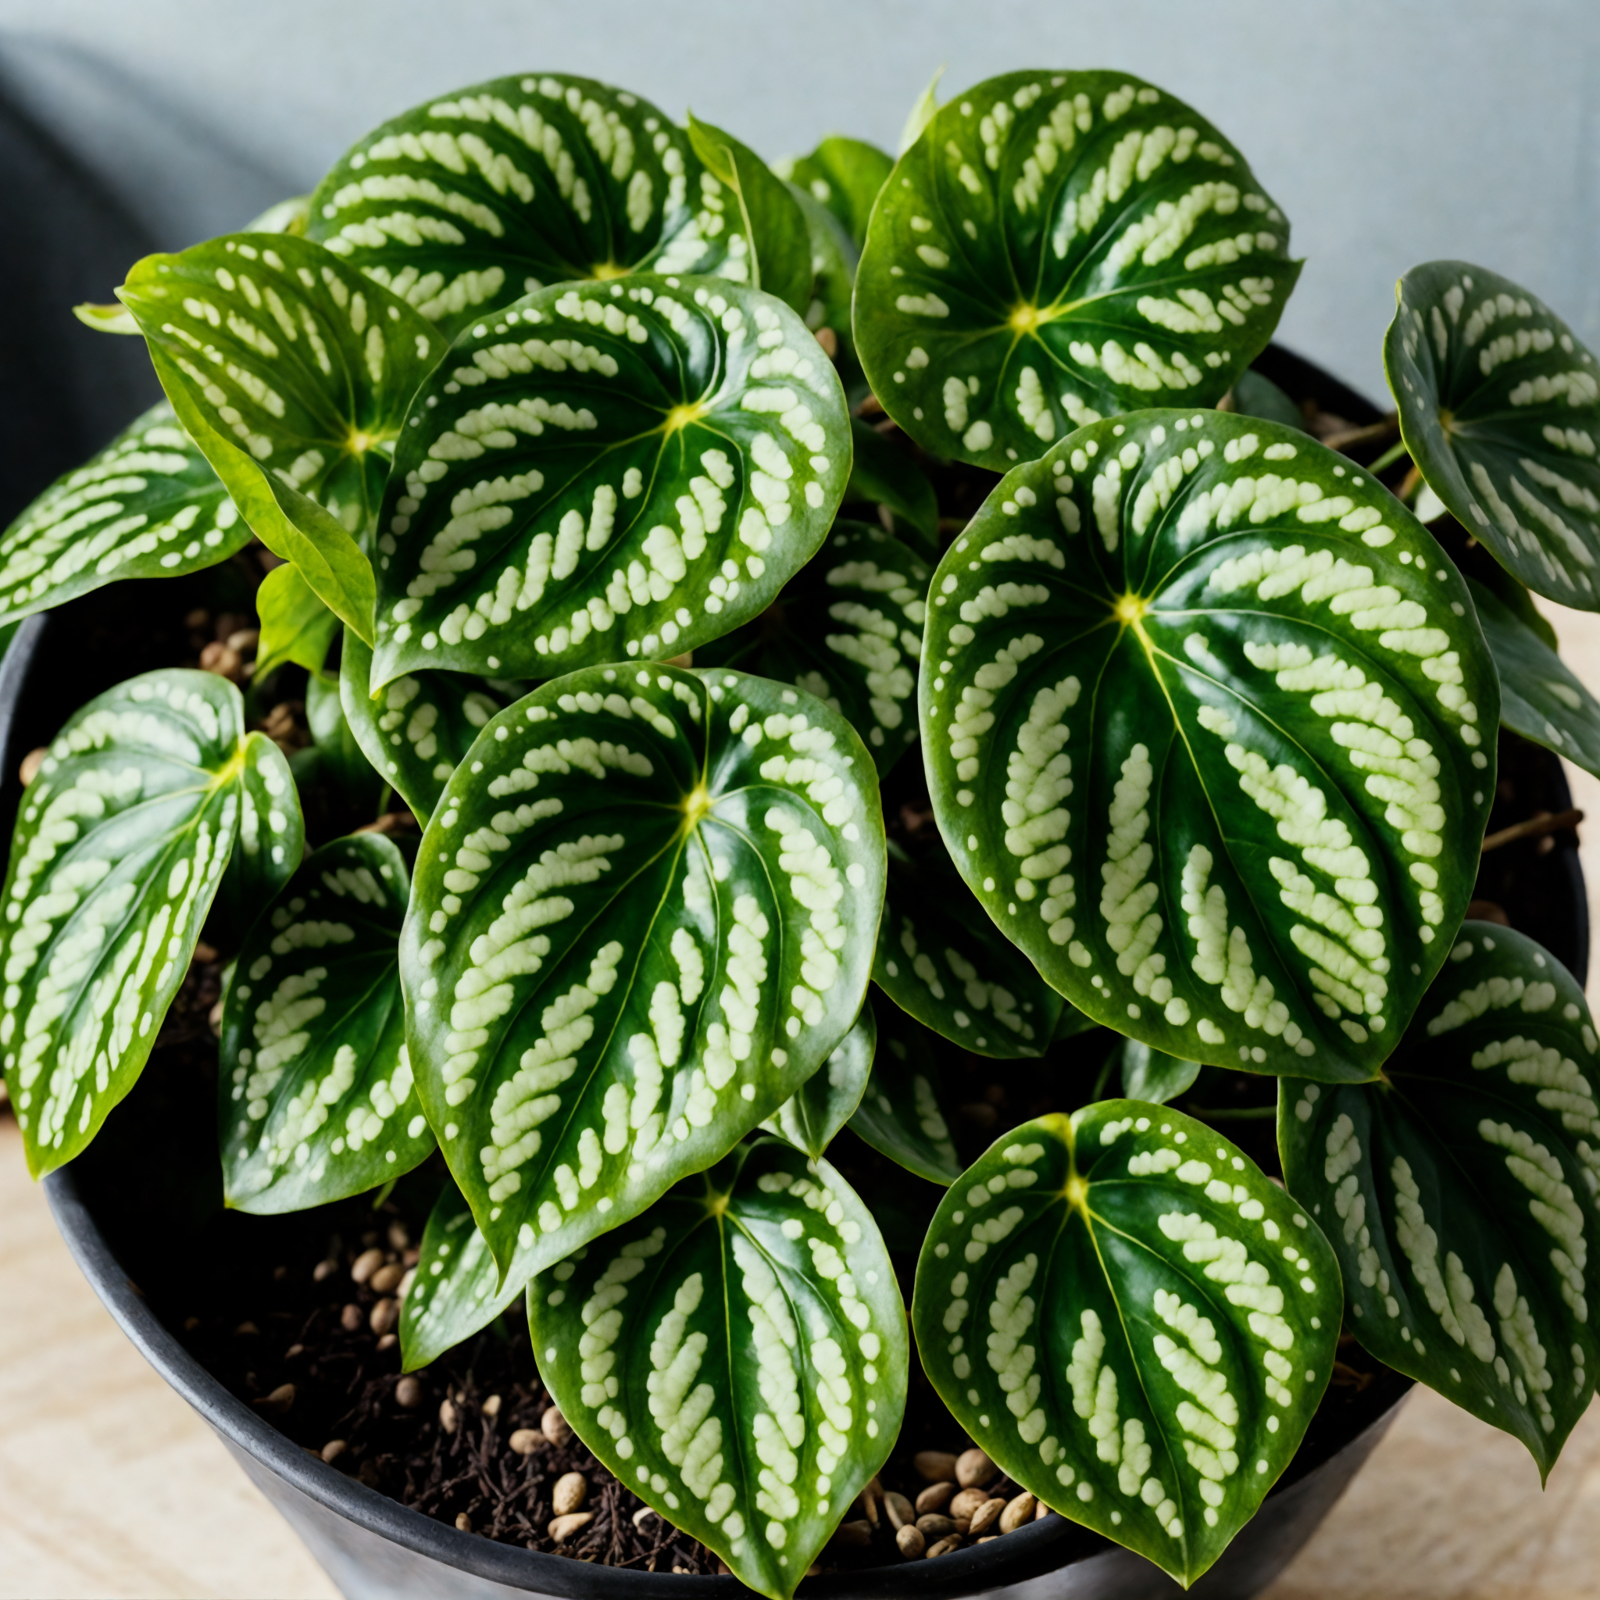 Peperomia argyreia, with its watermelon-striped leaves, sits in a planter against a dark background.